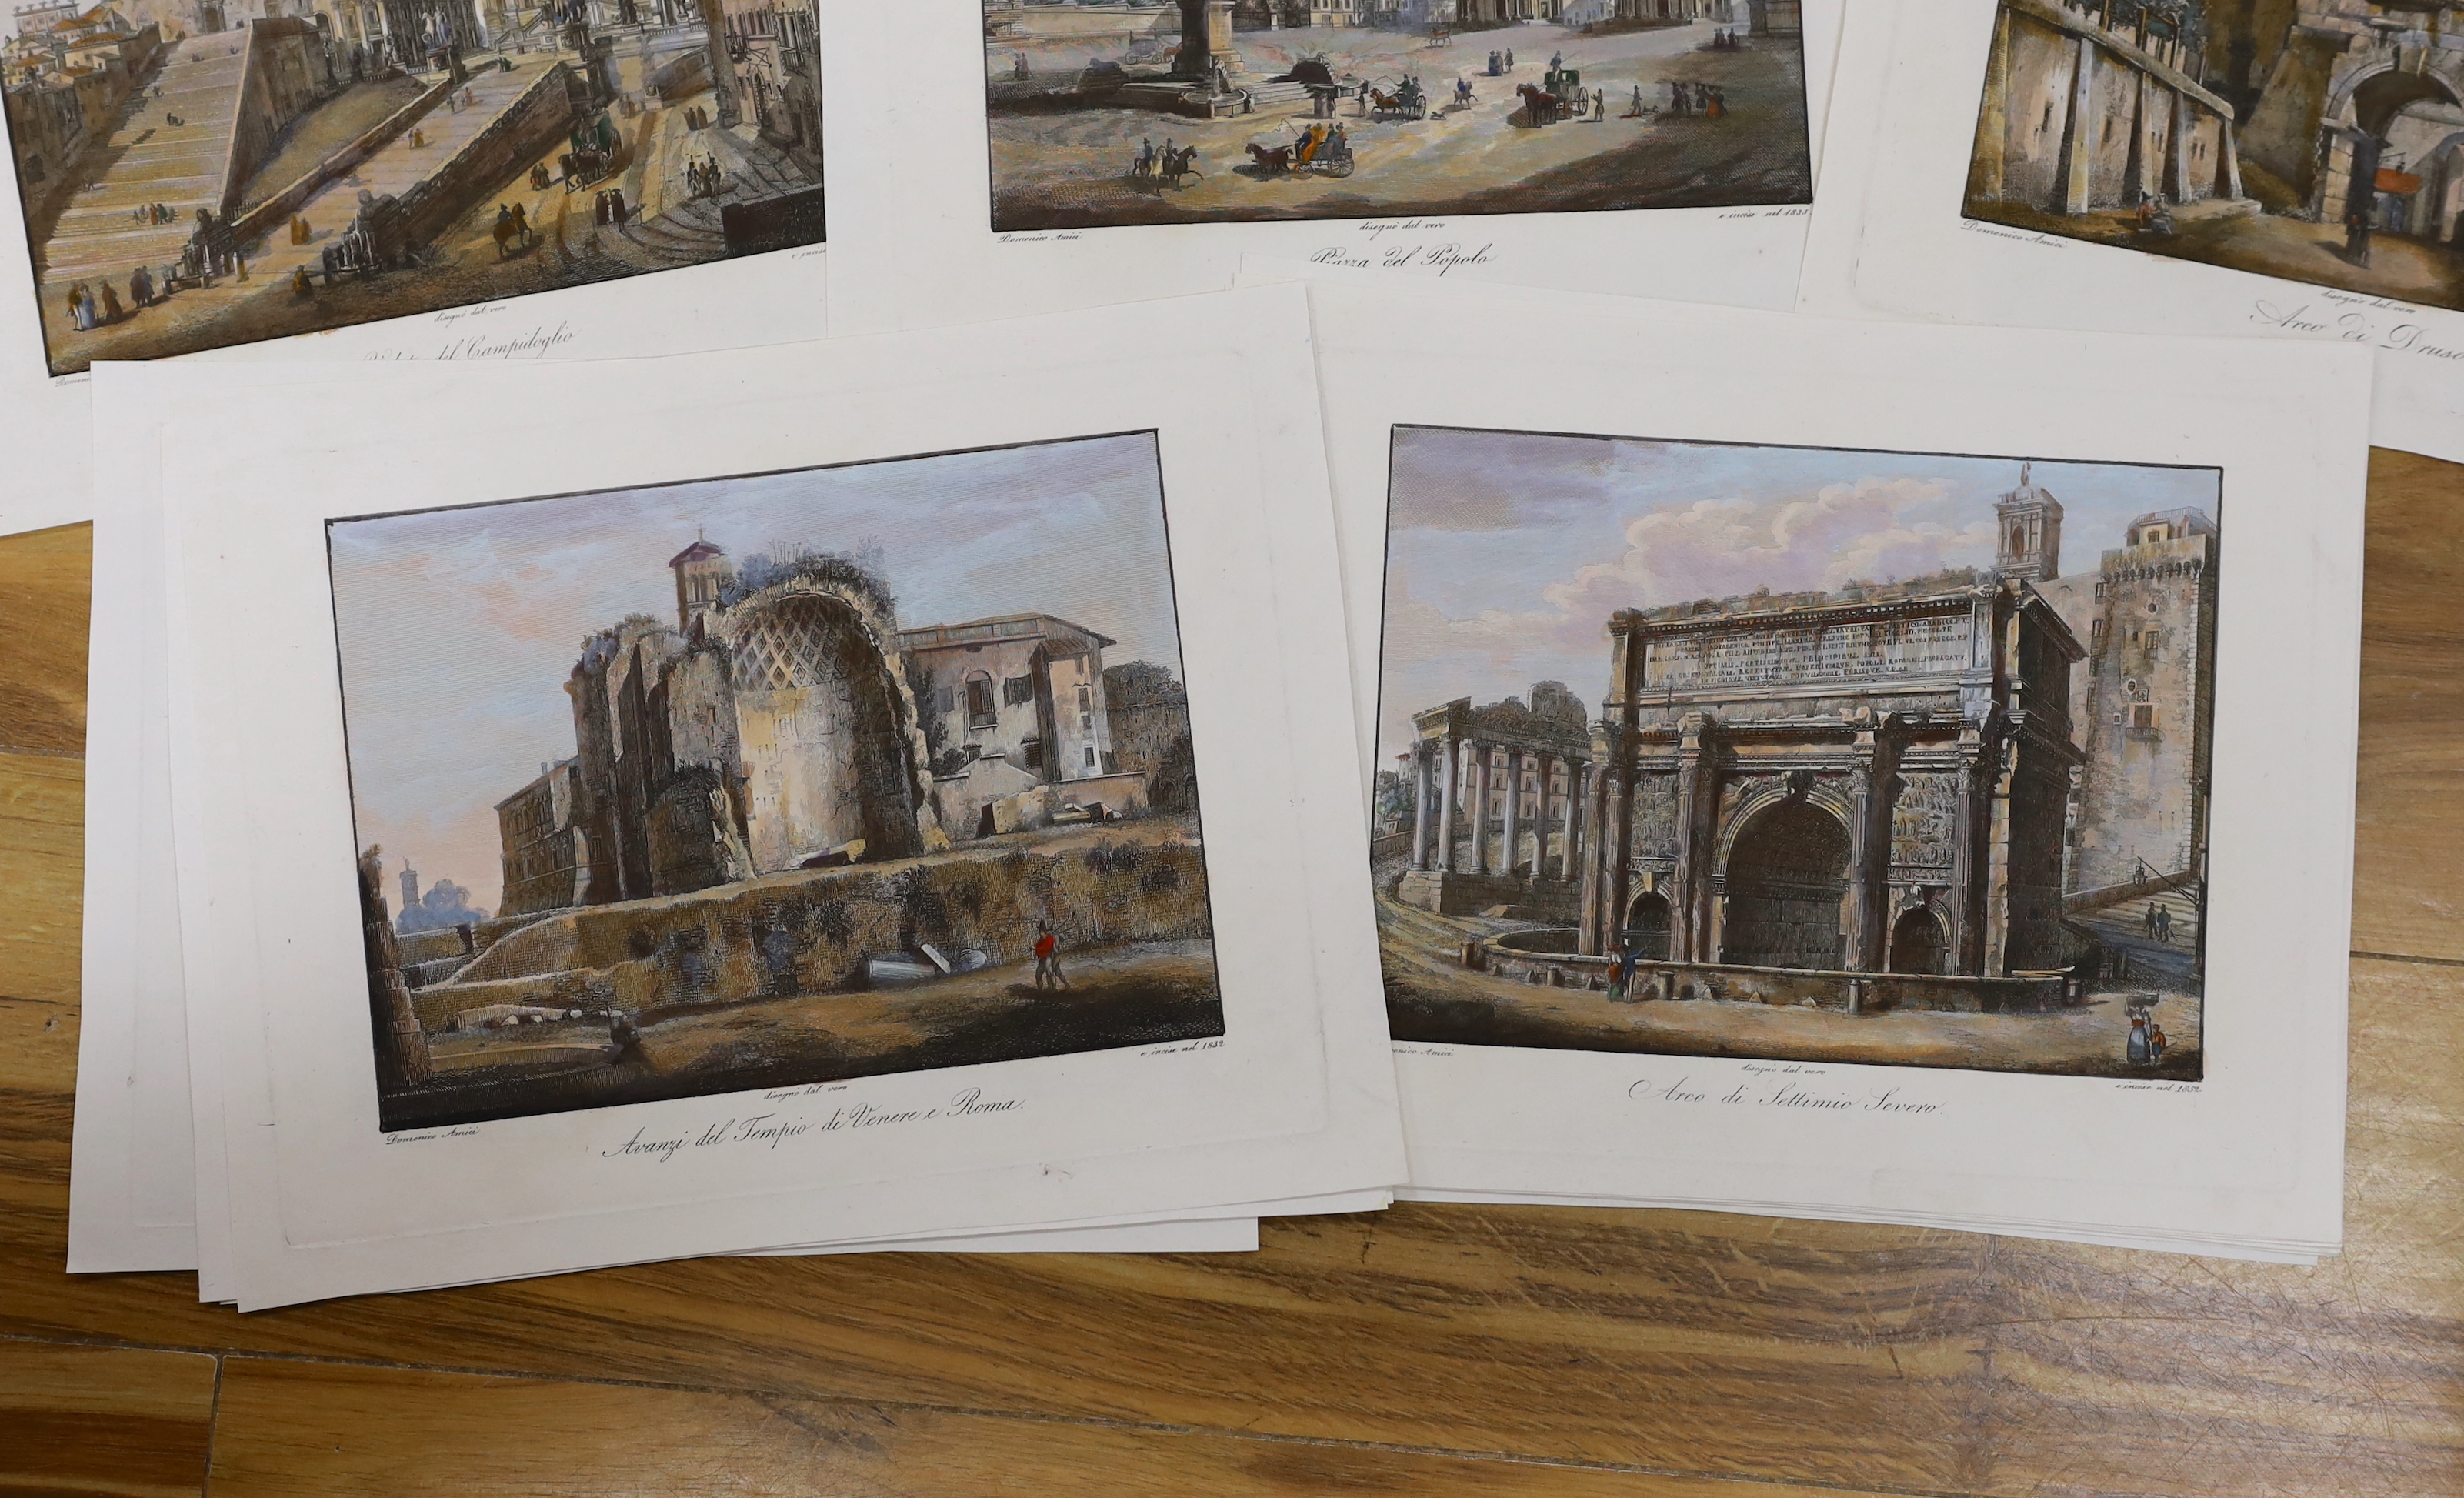 After Domenico Amici (Italian, b.1808), set of sixteen hand-coloured copper engravings, Italian monuments, each 33 x 25cm, unframed, housed in a leather wallet